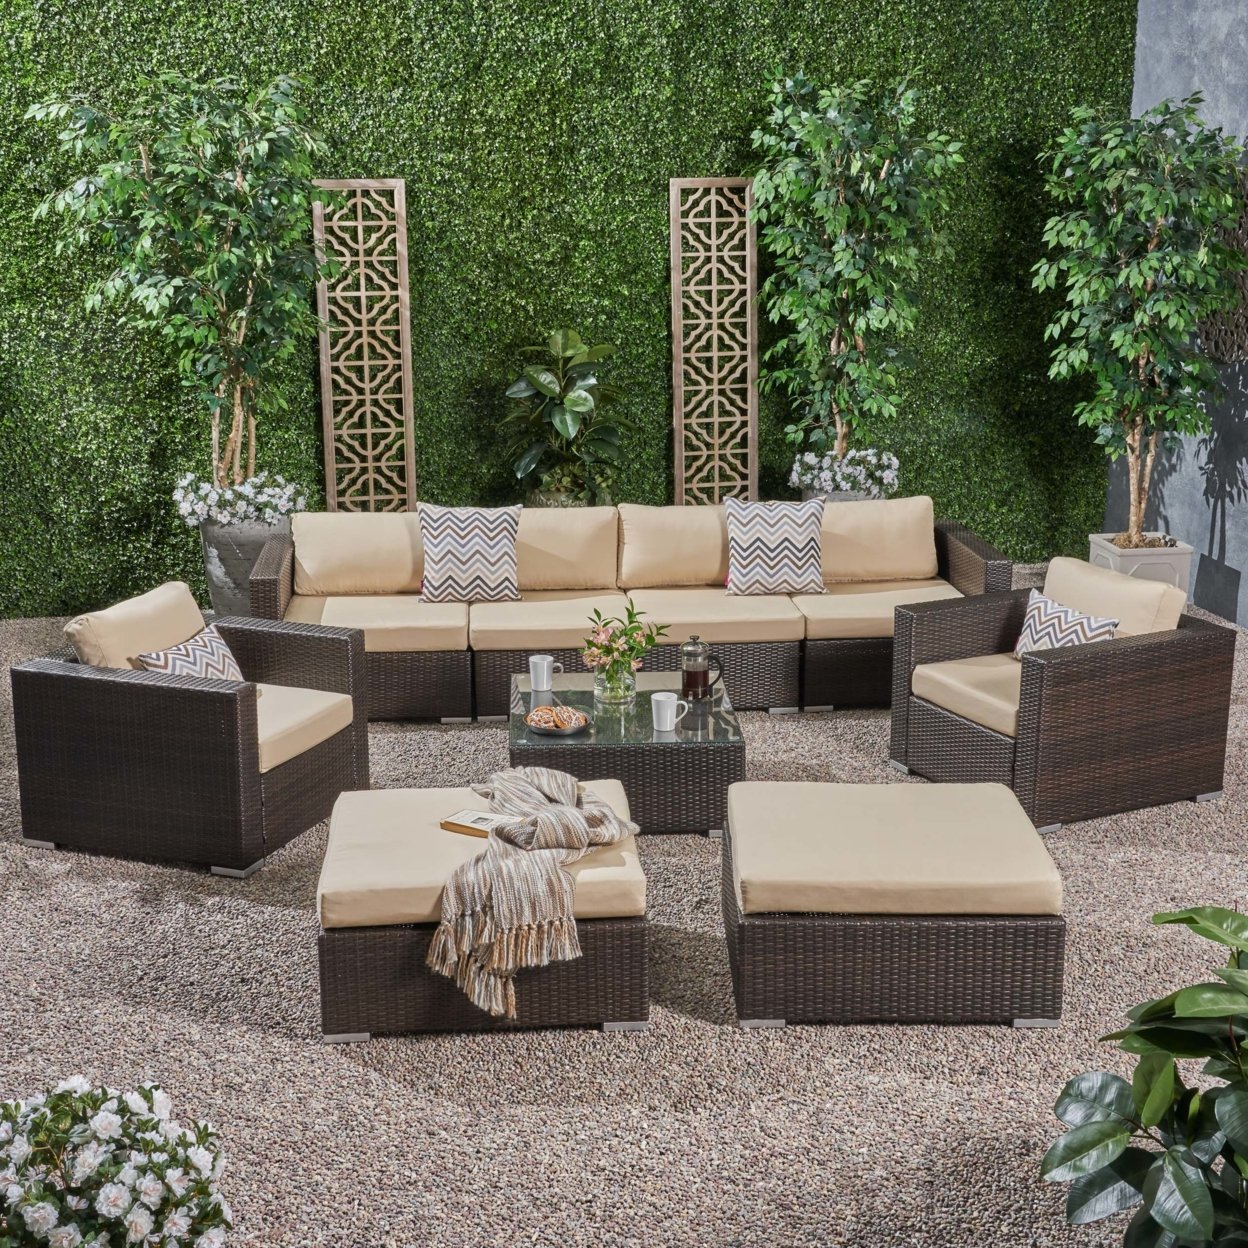 Francisco 9pc Outdoor Wicker Sectional Sofa Set With Cushions - Brown